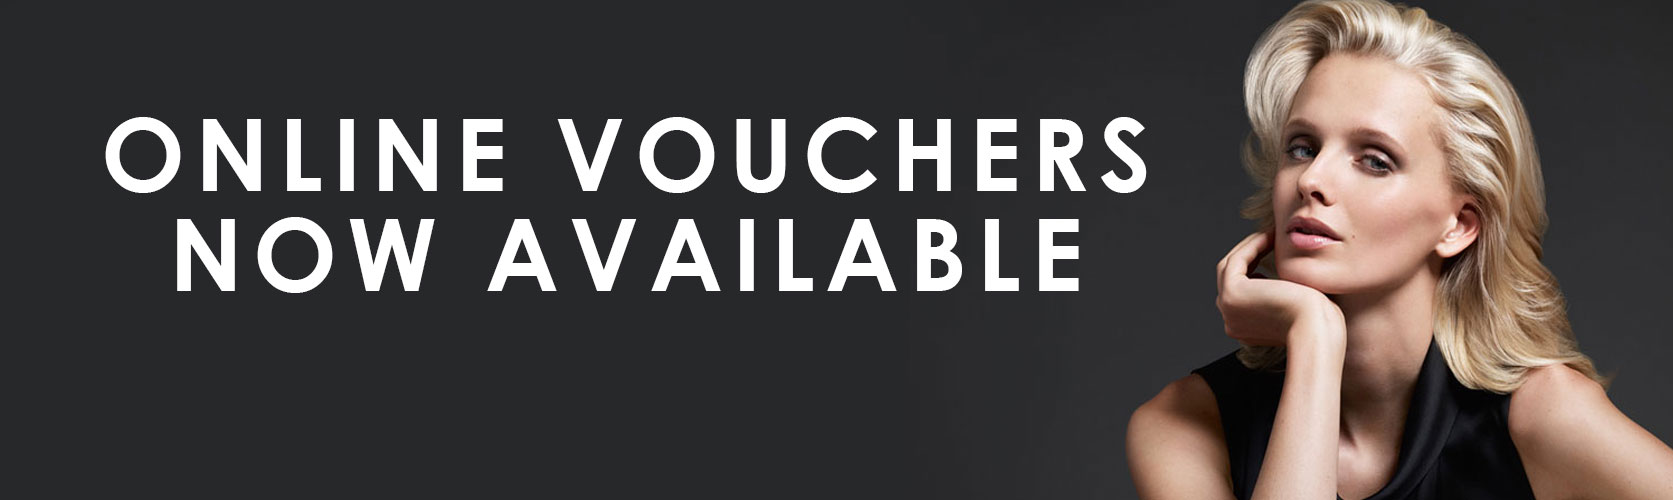 Online Vouchers Now Available at The salon hairdressers durham